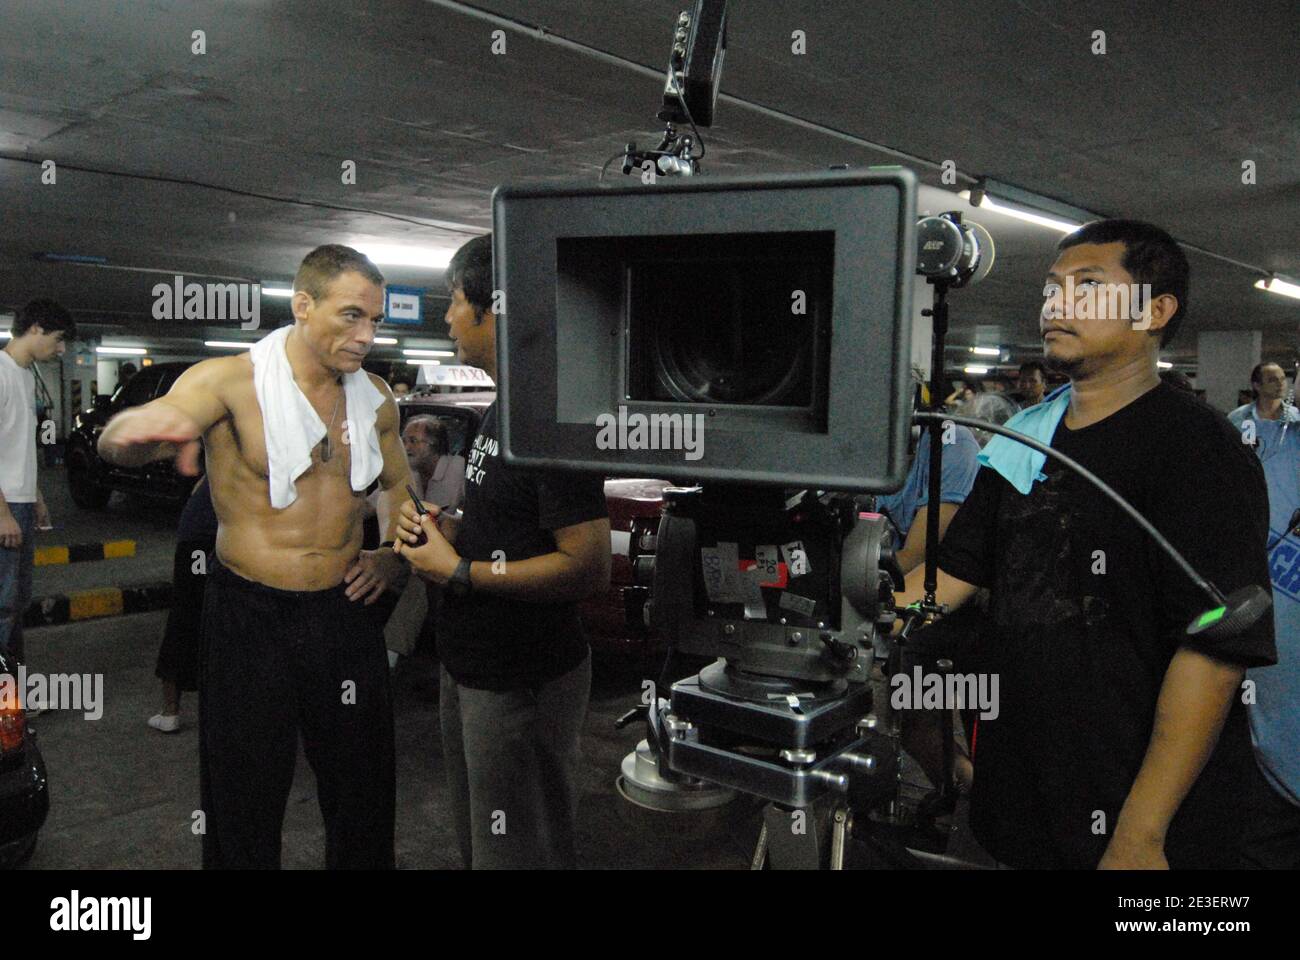 Jean-Claude Van Damme filming 'The Eagle path' in Thailand on June 8, 2008.  Photo by JCVD/ABACAPRESS.COM Stock Photo - Alamy